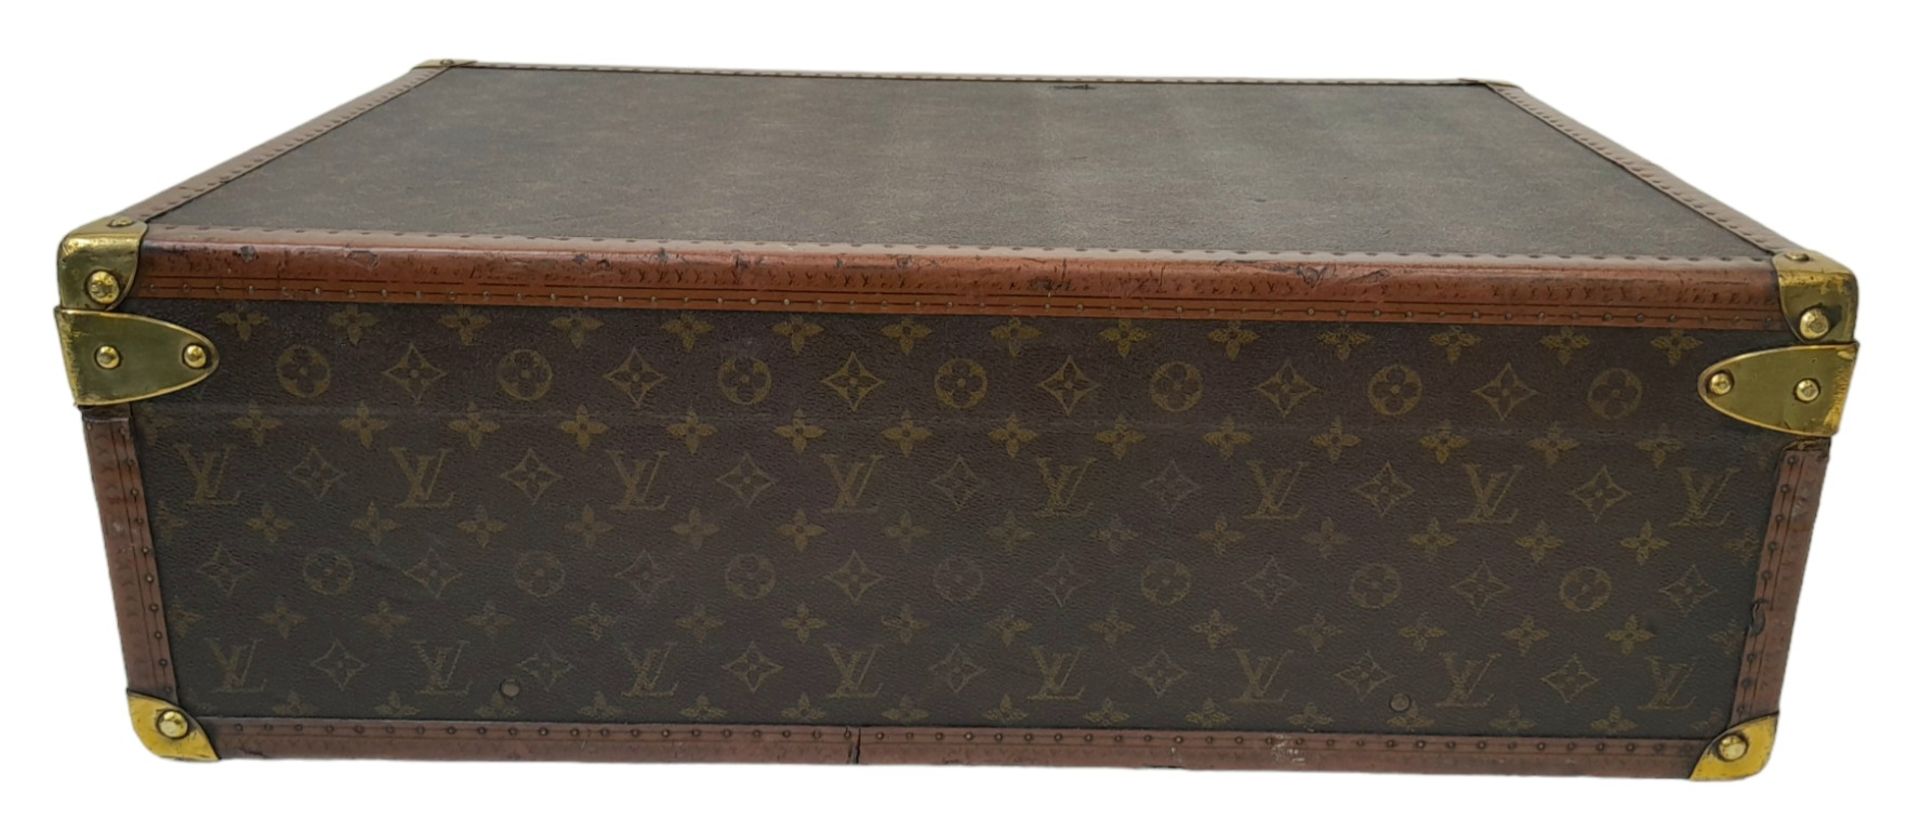 A Vintage Possibly Antique Louis Vuitton Trunk/Hard Suitcase. The smaller brother of Lot 38! - Image 5 of 12